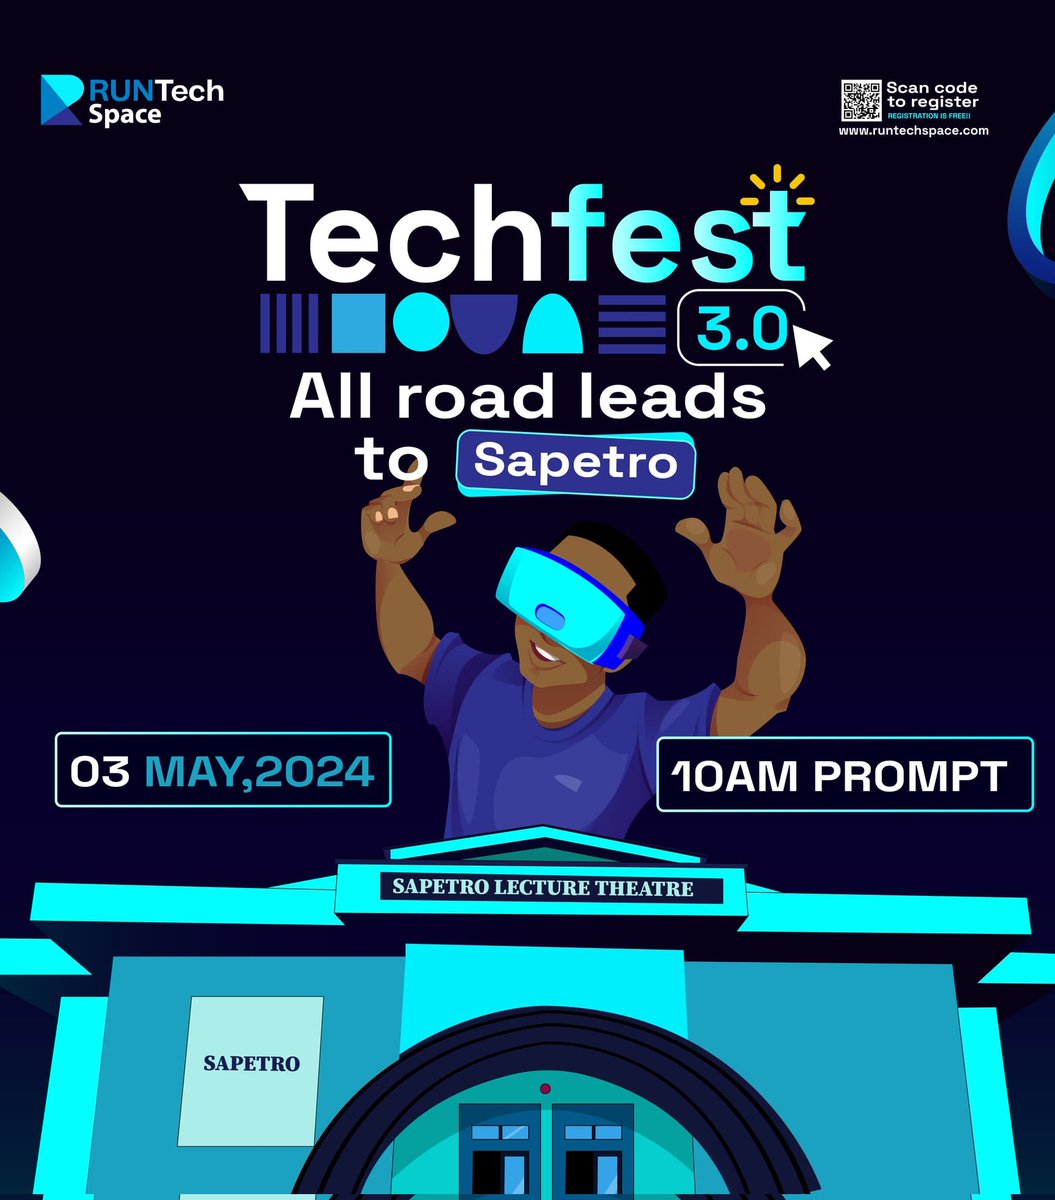 Day 2 was great 🤩
Day 3 promises to be bigger and better!!🔥

Get ready for the grand finale of TechFest 3.0, where our esteemed speakers will take us on a journey into uncharted territories of innovation. 

Join us for insightful panel sessions and endless fun tomorrow!🚀
#tech